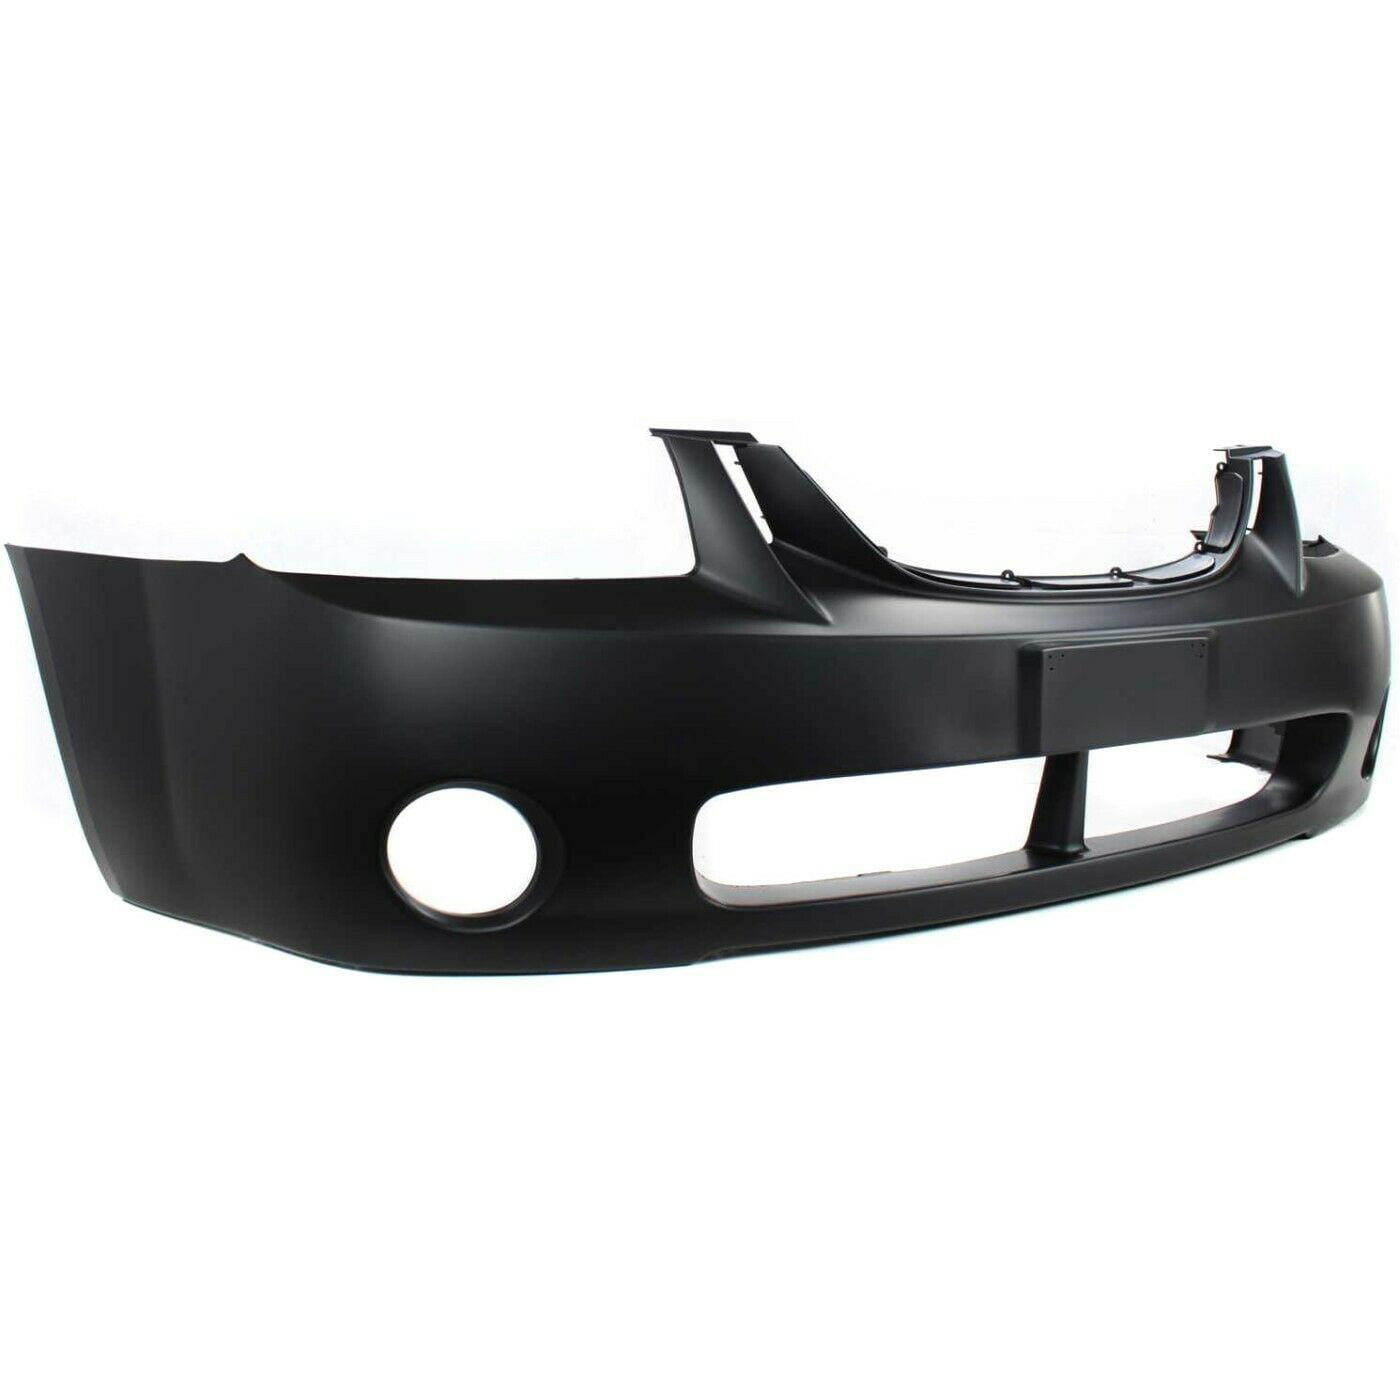 Front Bumper Cover For 2004 2005 2006 Kia Spectra Spectra5 w Fog Light holes 